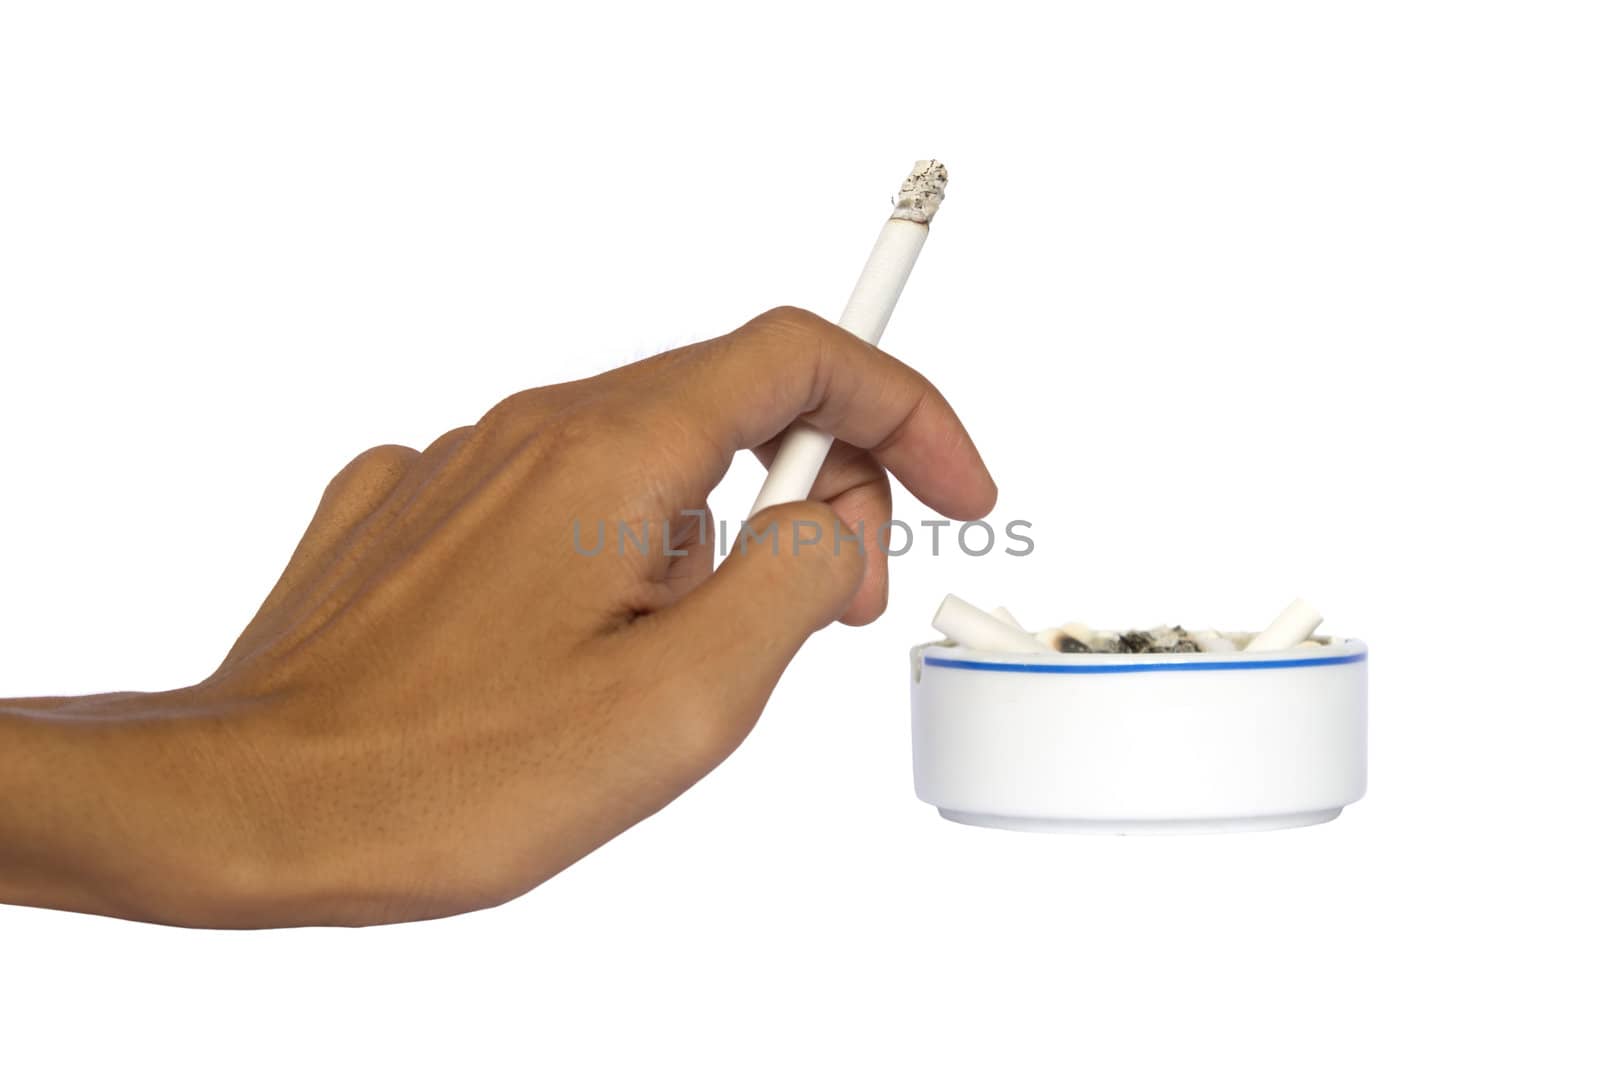 Isolated hand and ceramic ashtray with cigarettes.